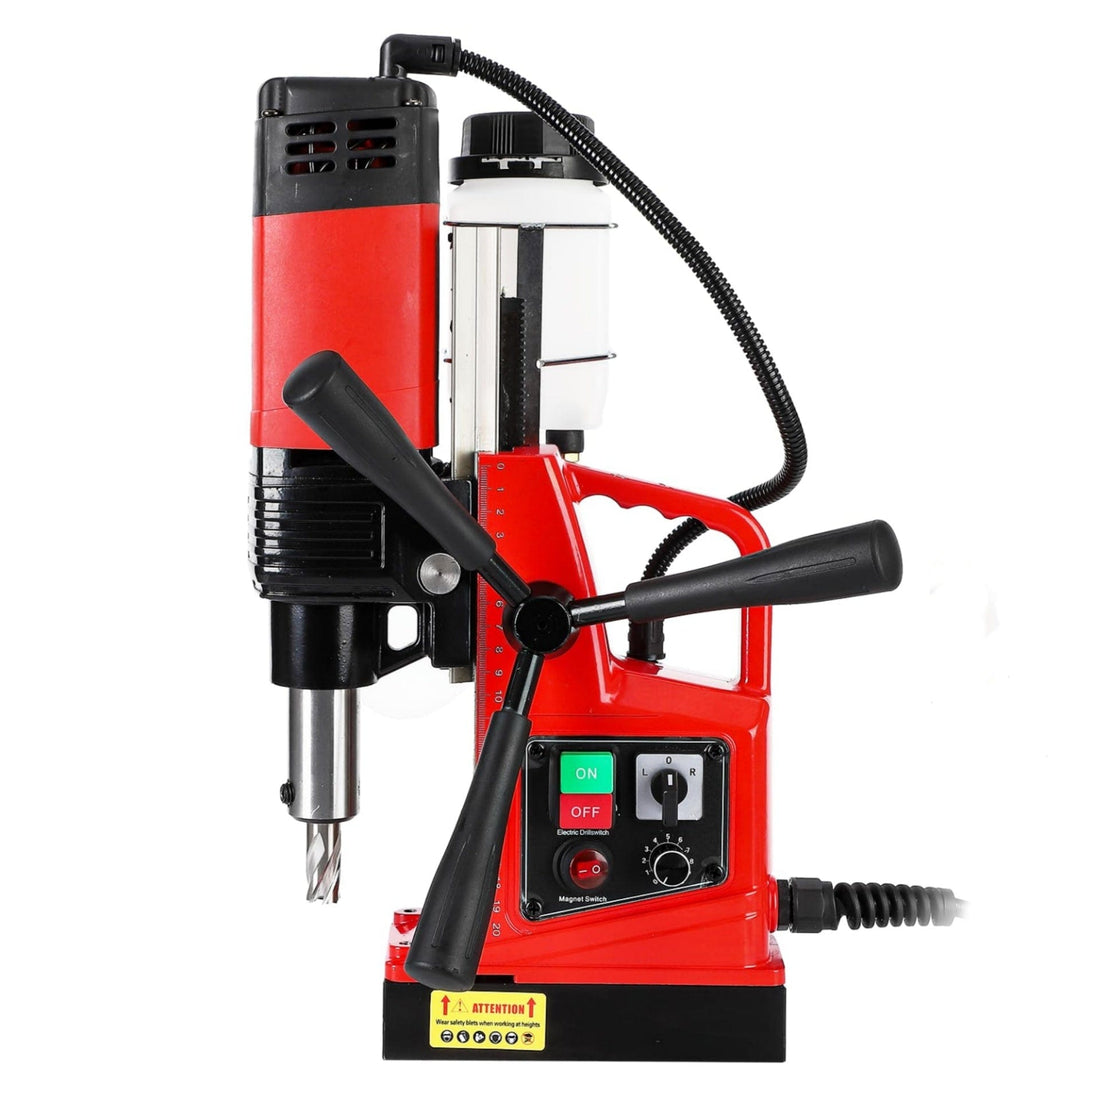 1.6 Inch 1300W Mag Drill Press,Dia 2922lbf for Industrial Use